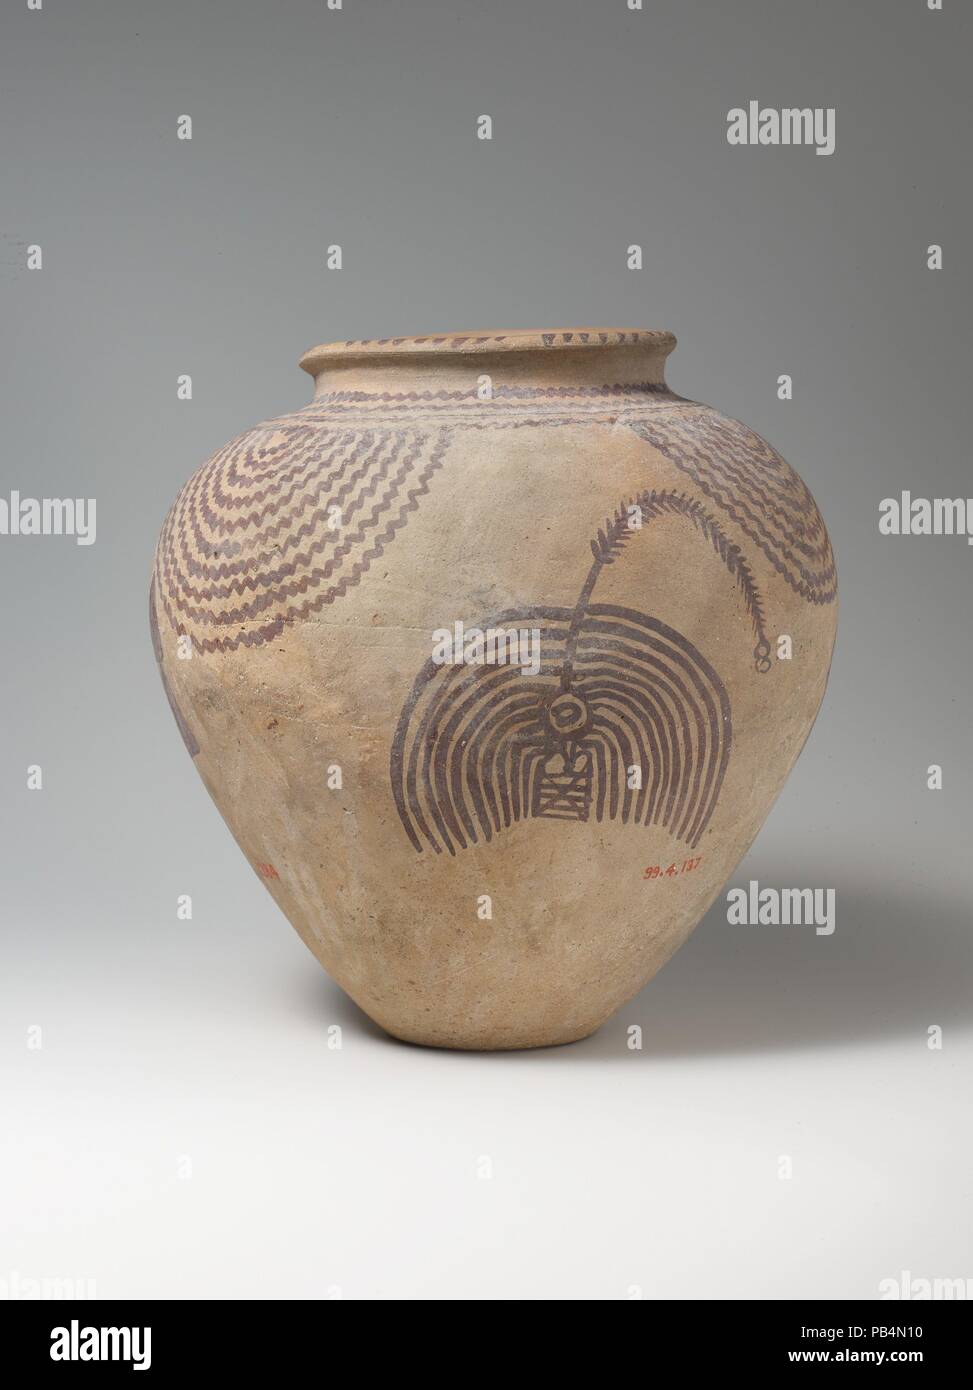 Jar with Motifs of Plants and Water. Dimensions: H: 21 cm (8 1/4 in.); diam: 20 cm (7 7/8 in.). Date: ca. 3450-3300 B.C.. Museum: Metropolitan Museum of Art, New York, USA. Stock Photo